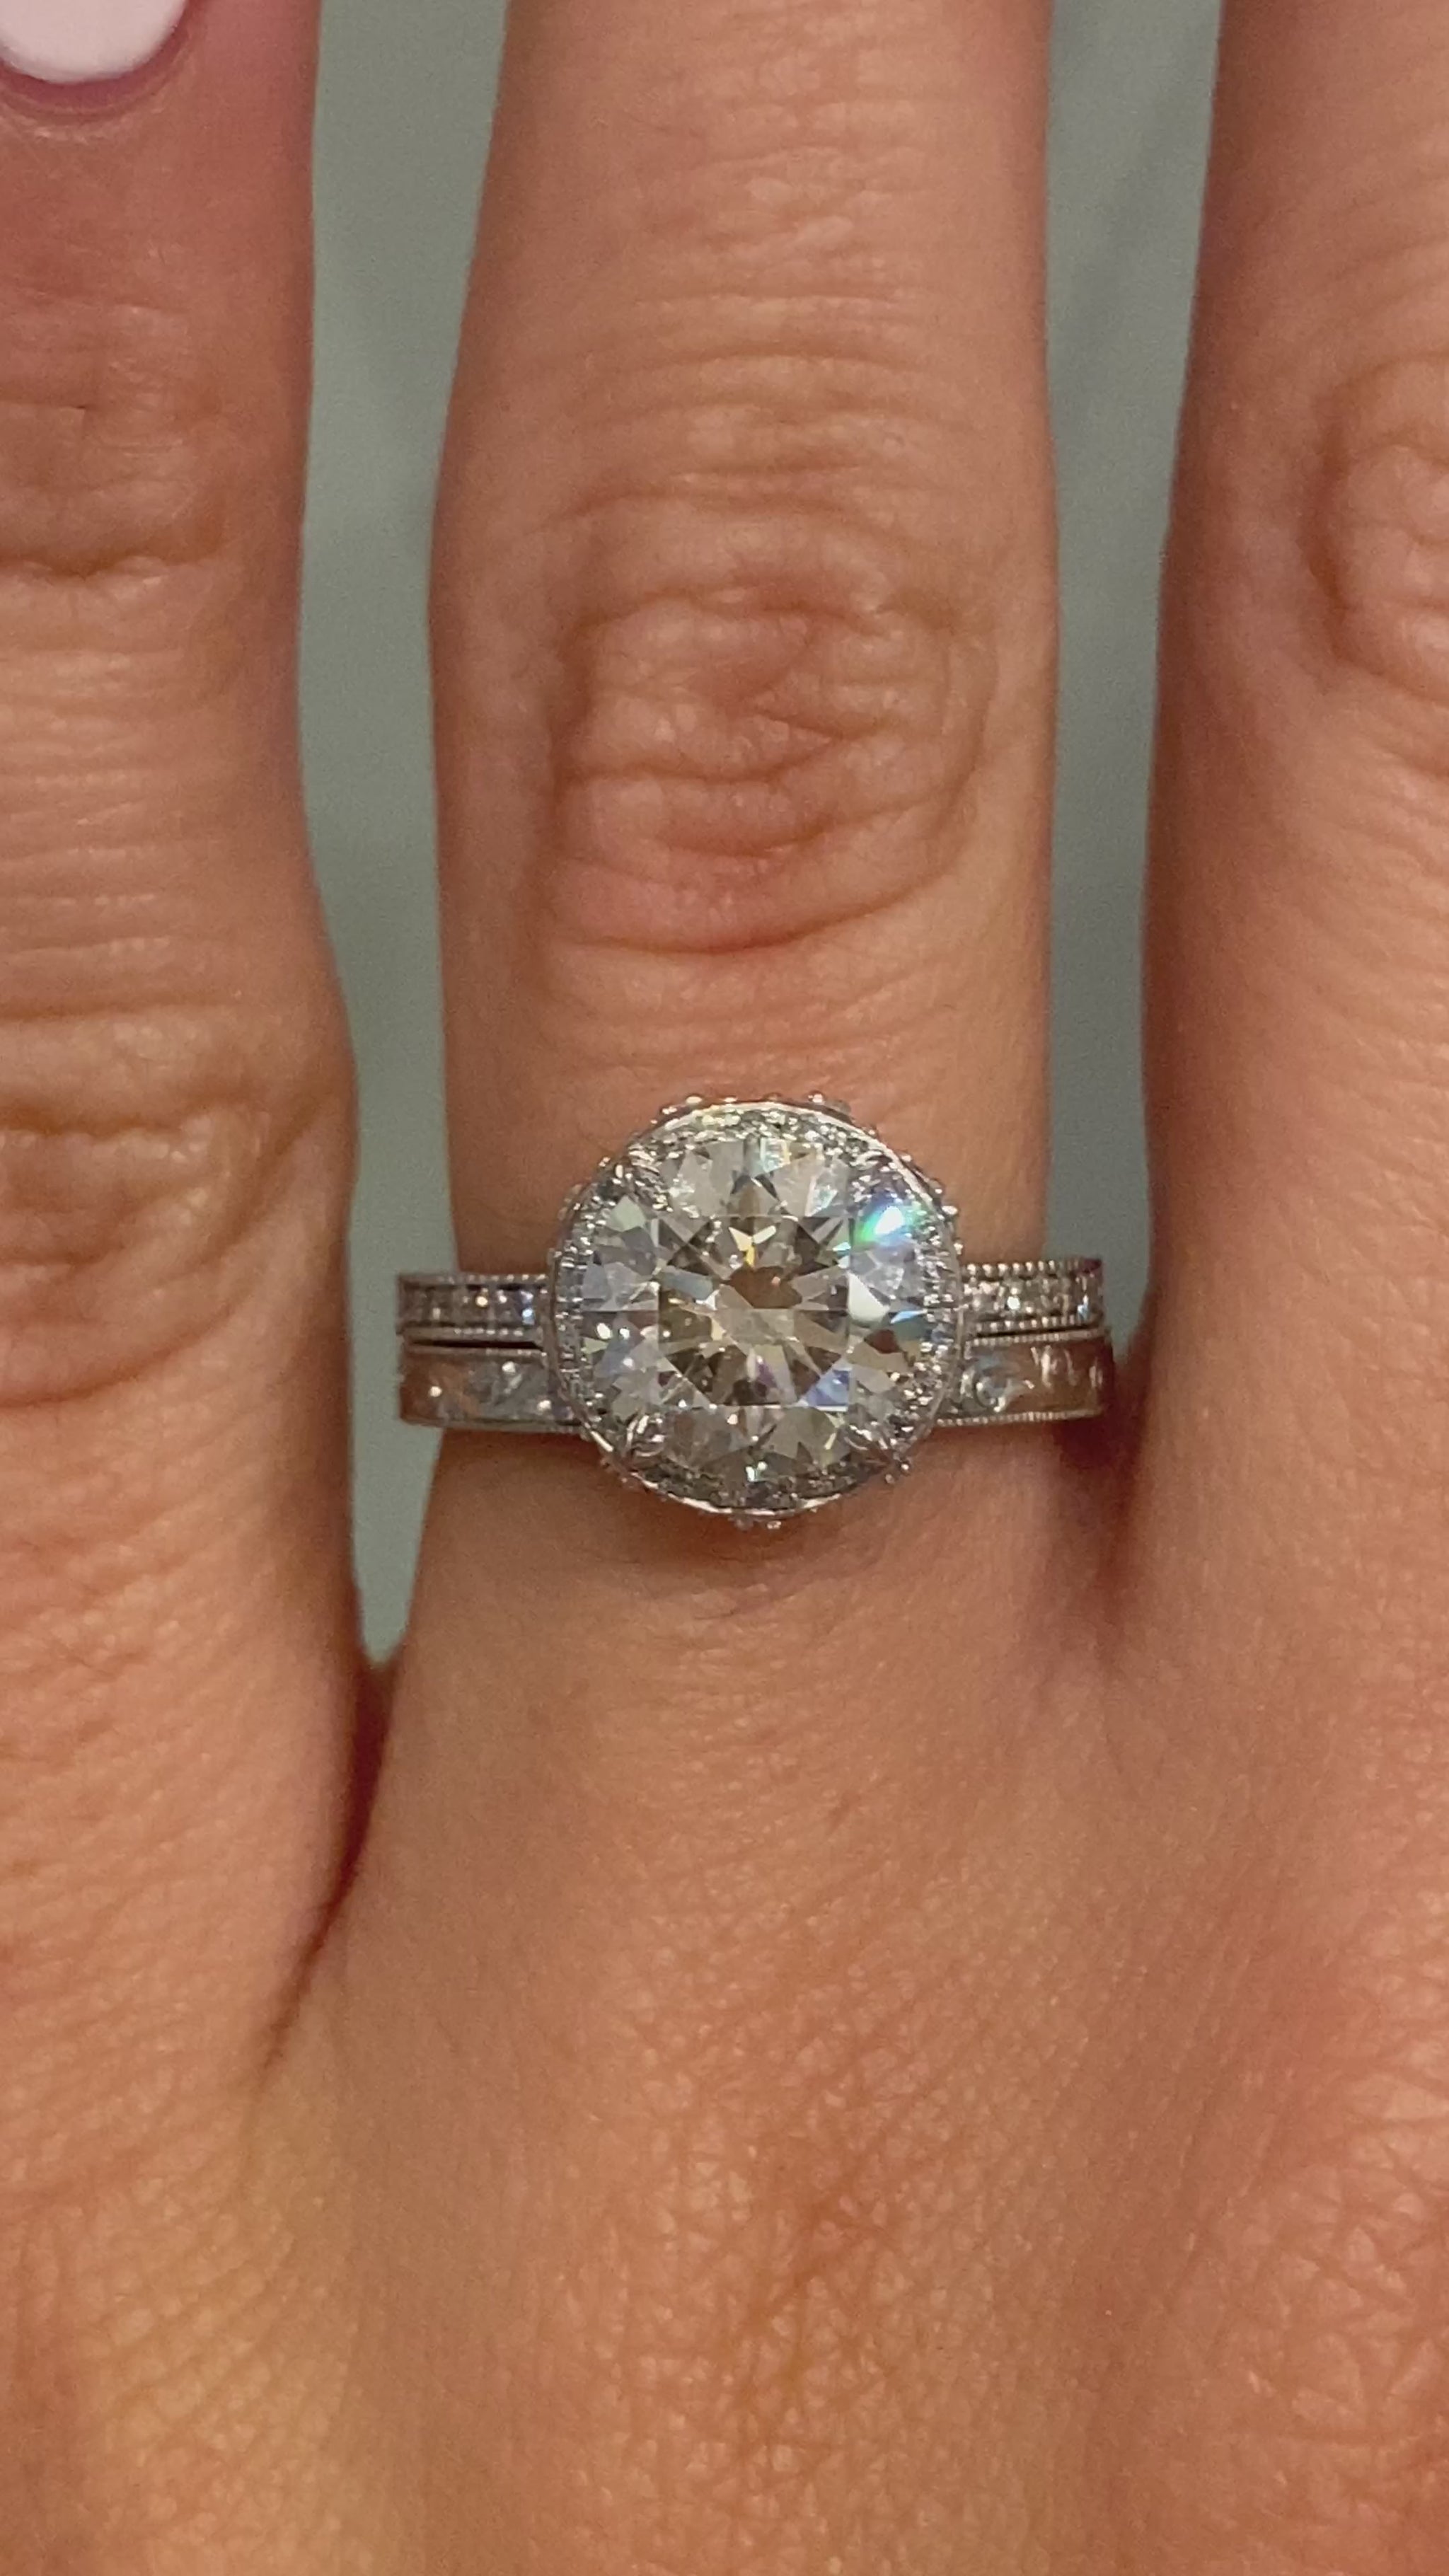 caption:Shown with 2.0ct round cut diamond, paired with Raynee wedding band (sold separately)